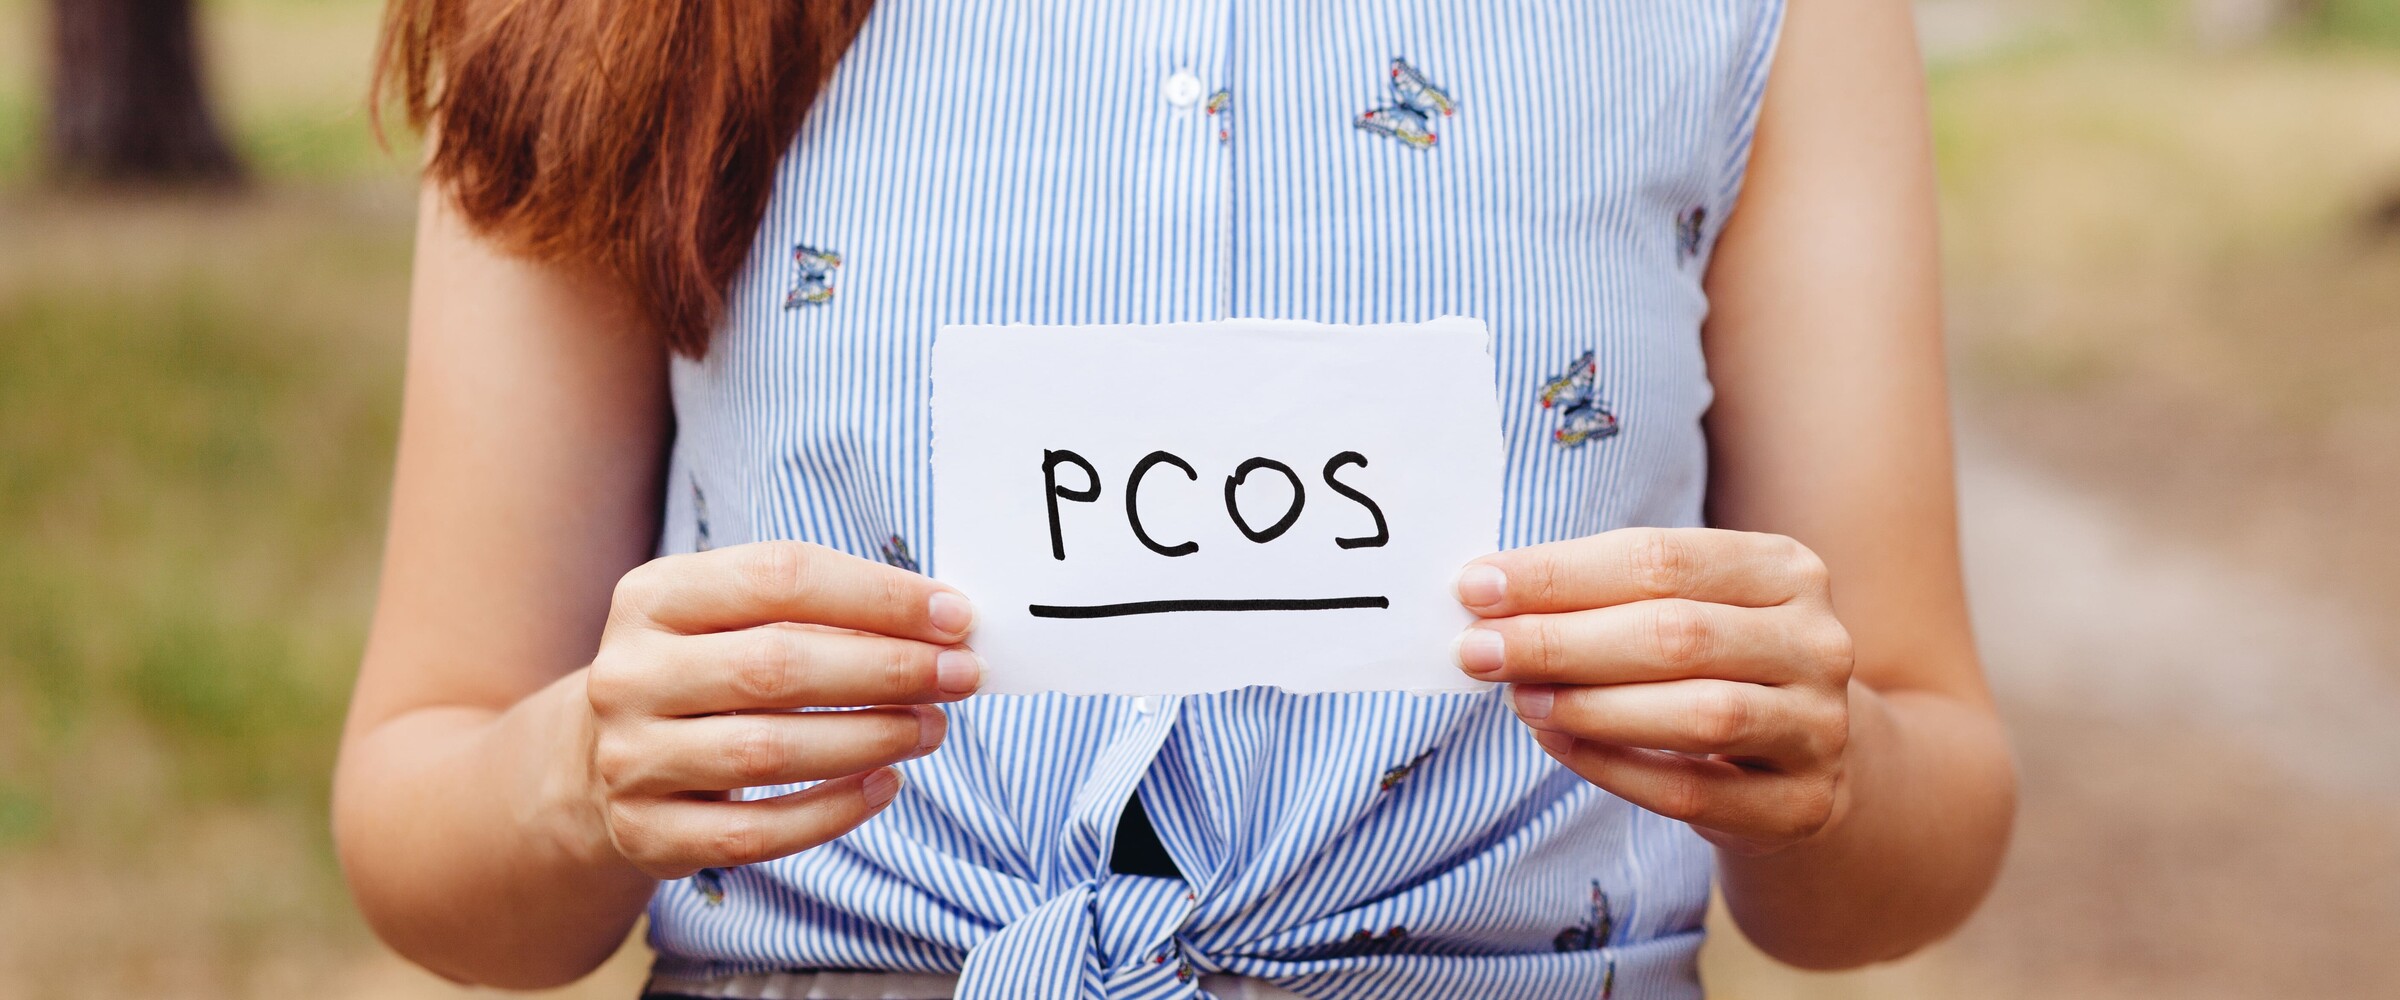 Woman holding a sign saying PCOS